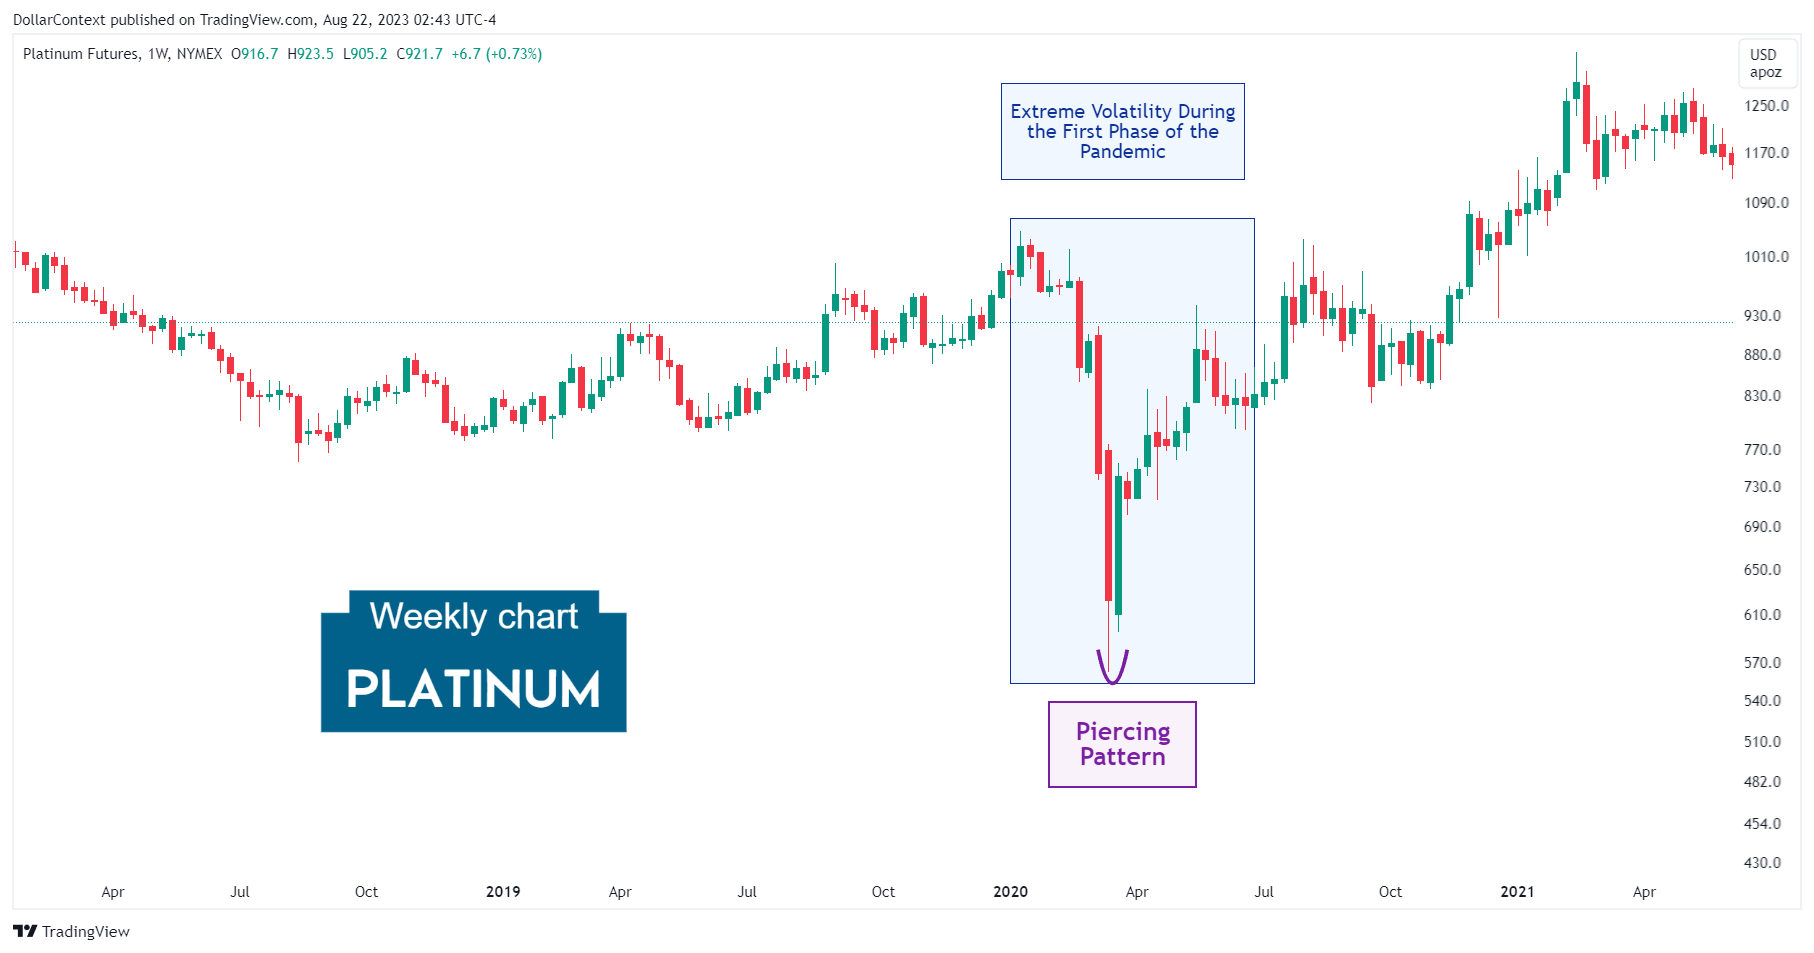 Platinum Futures: Piercing Pattern. March 2020 (Weekly Chart)